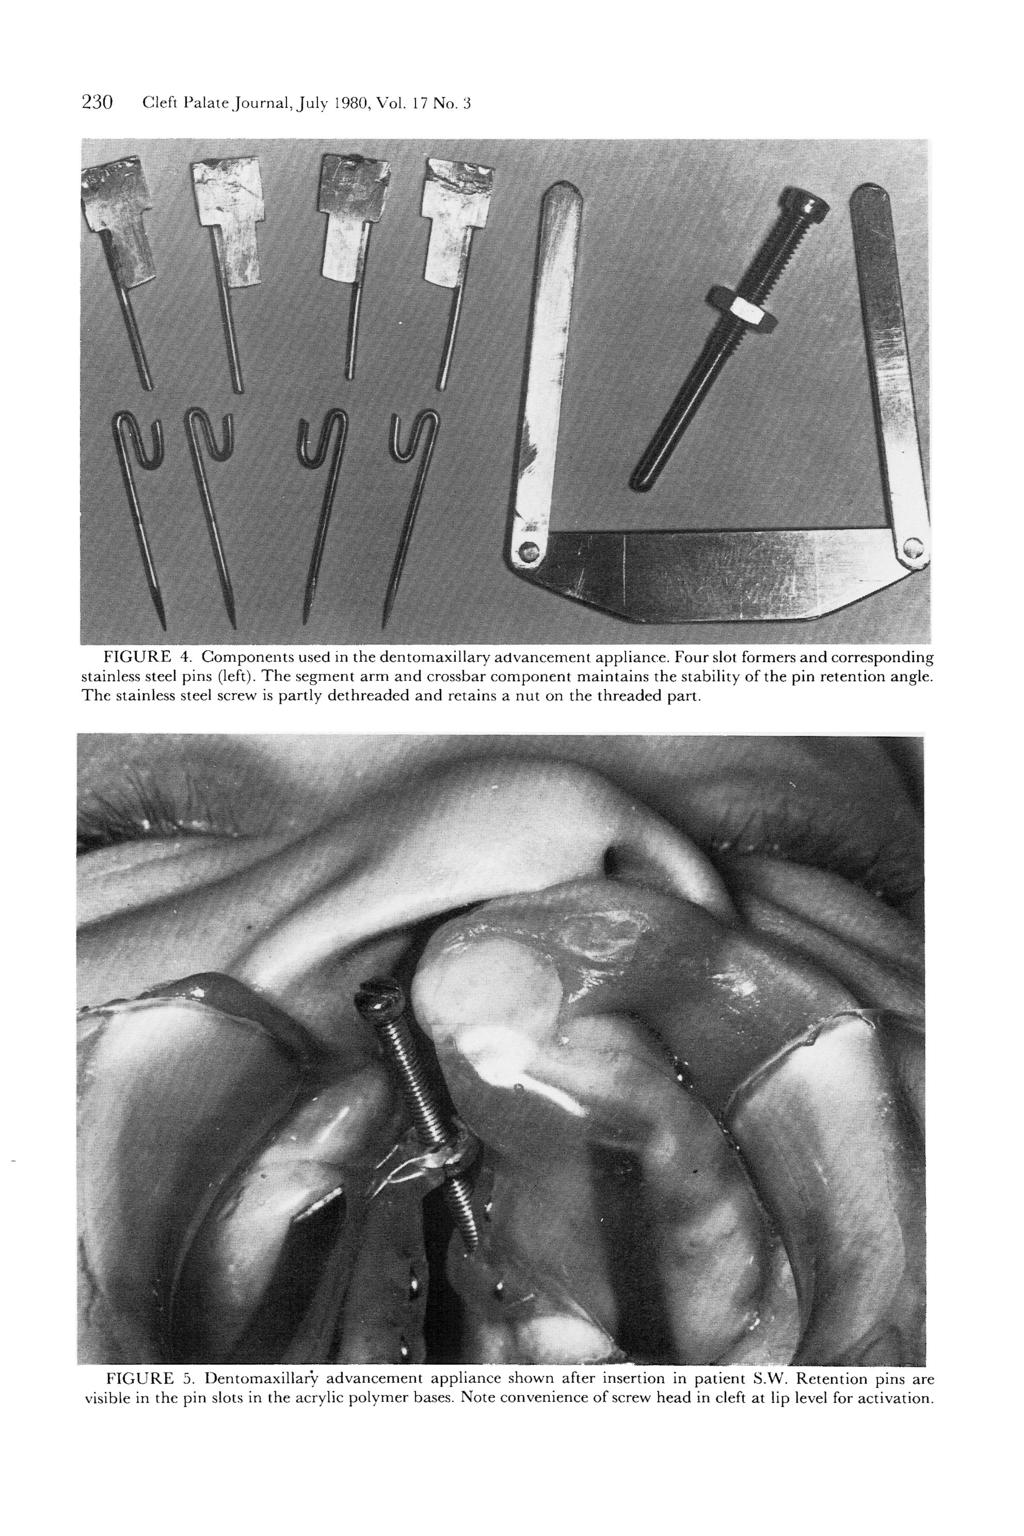 230 Cleft Palate Journal, July 1980, Vol. 17 No. 3 FIGURE 4. Components used in the dentomaxillary advancement appliance. Four slot formers and corresponding stainless steel pins (left).